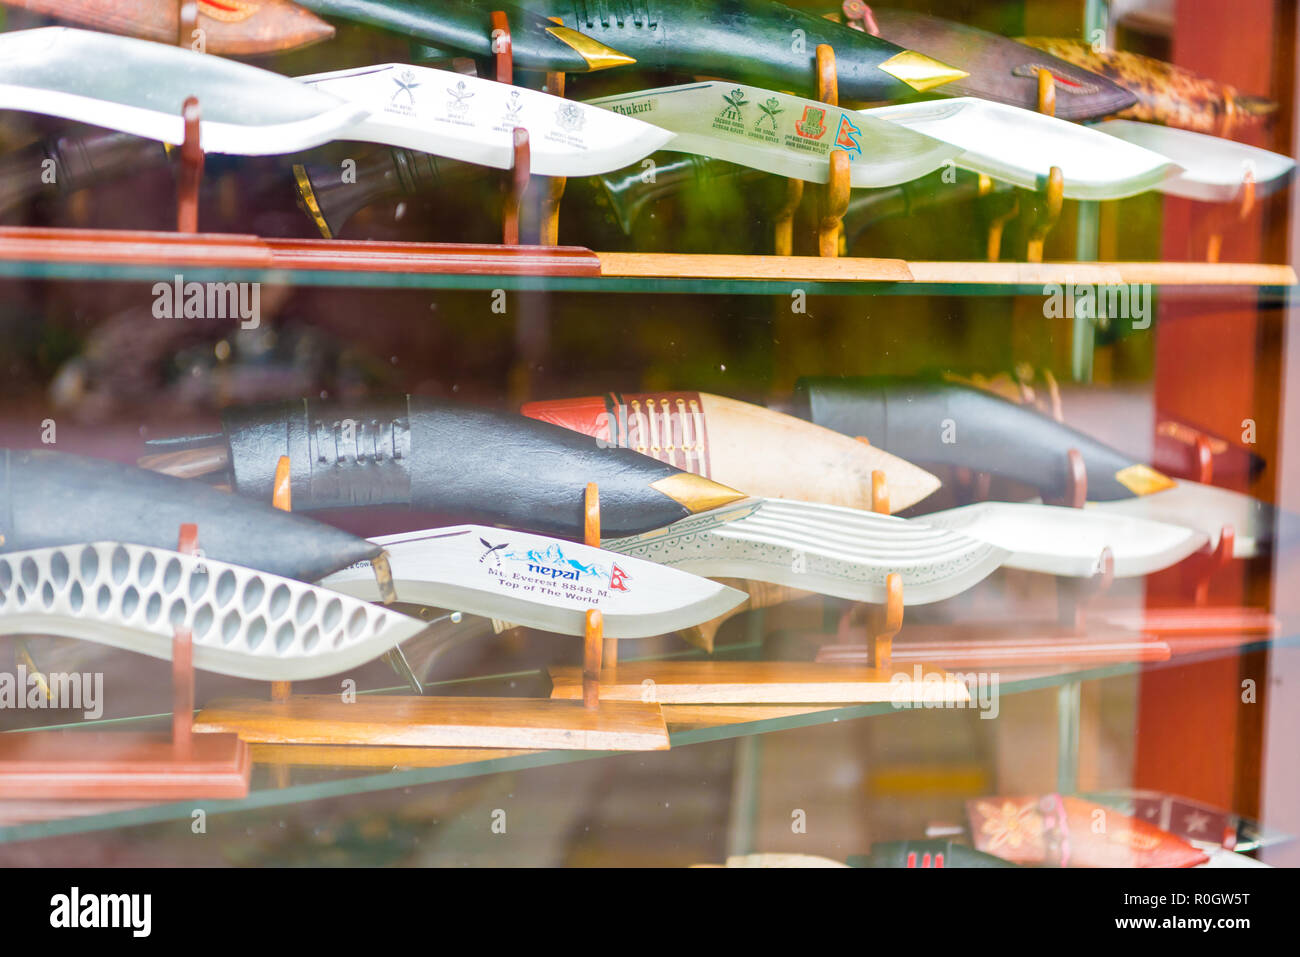 Pokhara, Nepal - July 31, 2018 : Kukri or khukuri knives as souvenirs in shop window in Pokhara town, are considered as the national knife and icon of Stock Photo